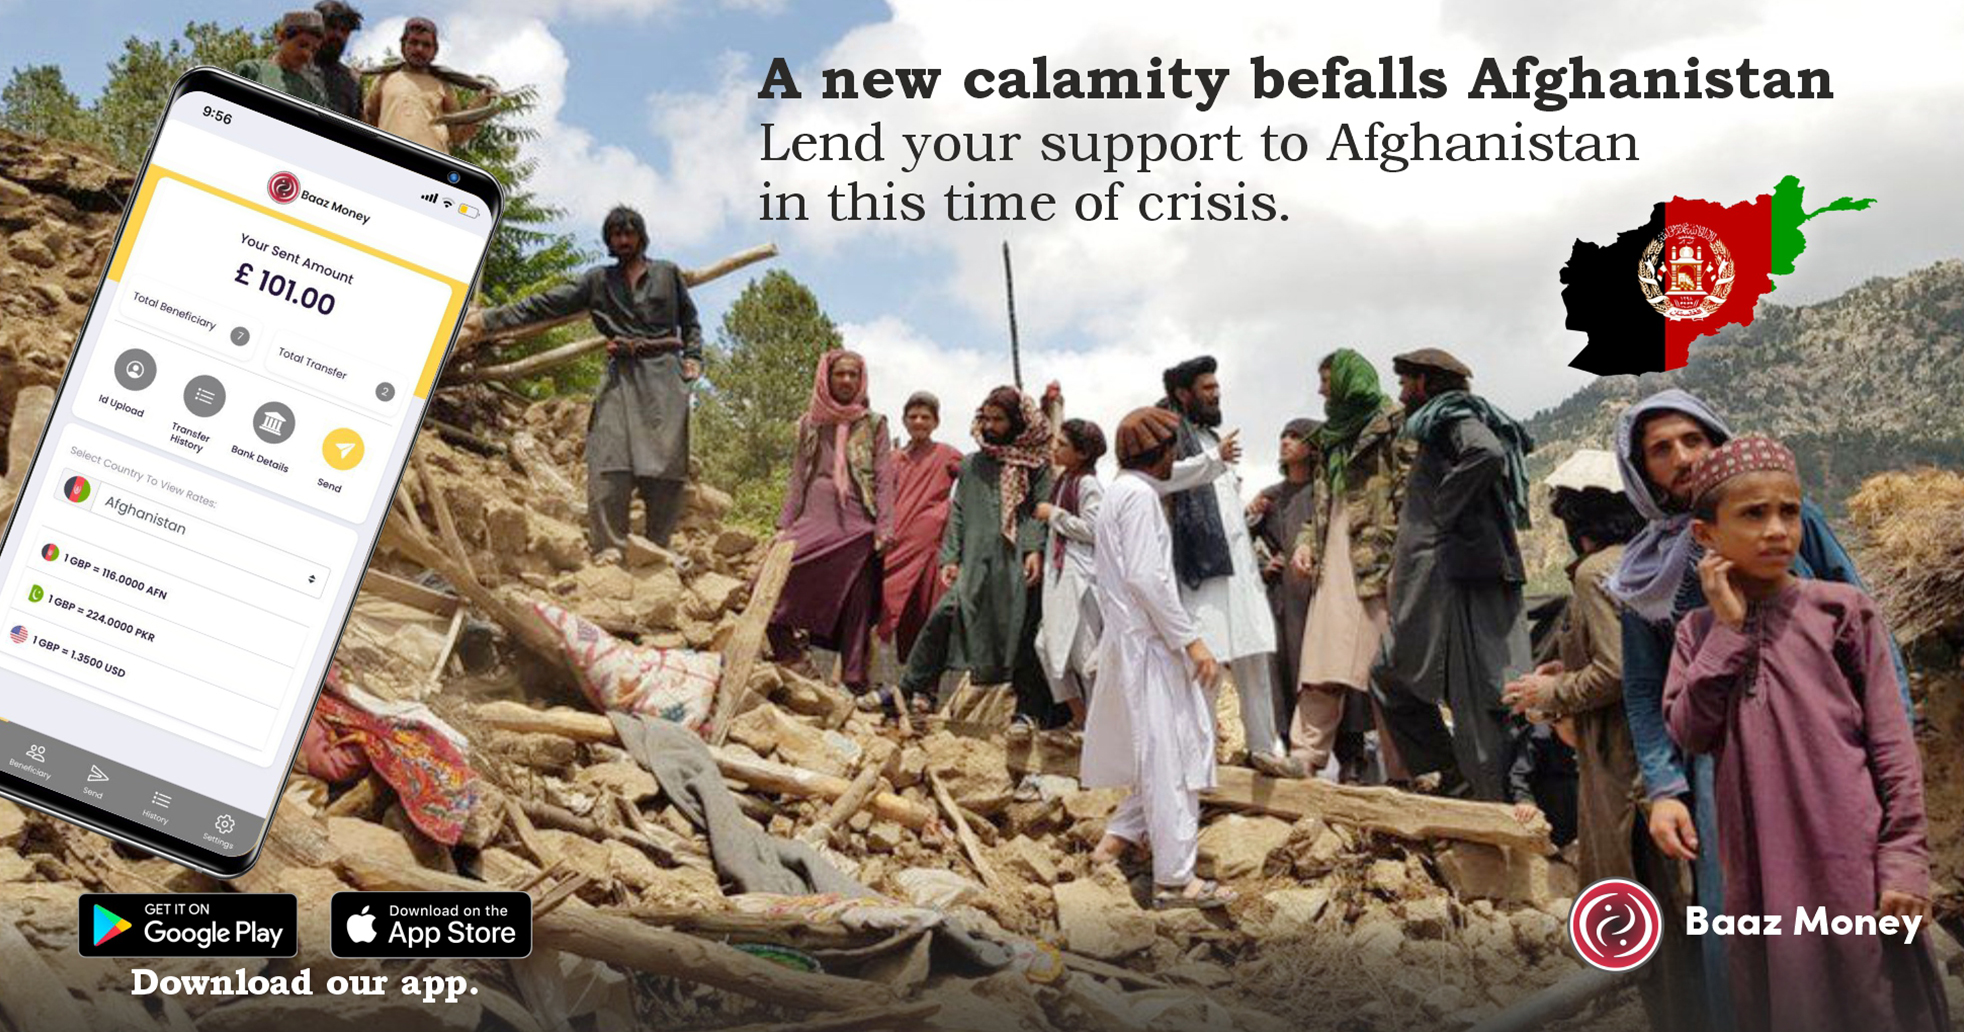 A new calamity befalls Afghanistan